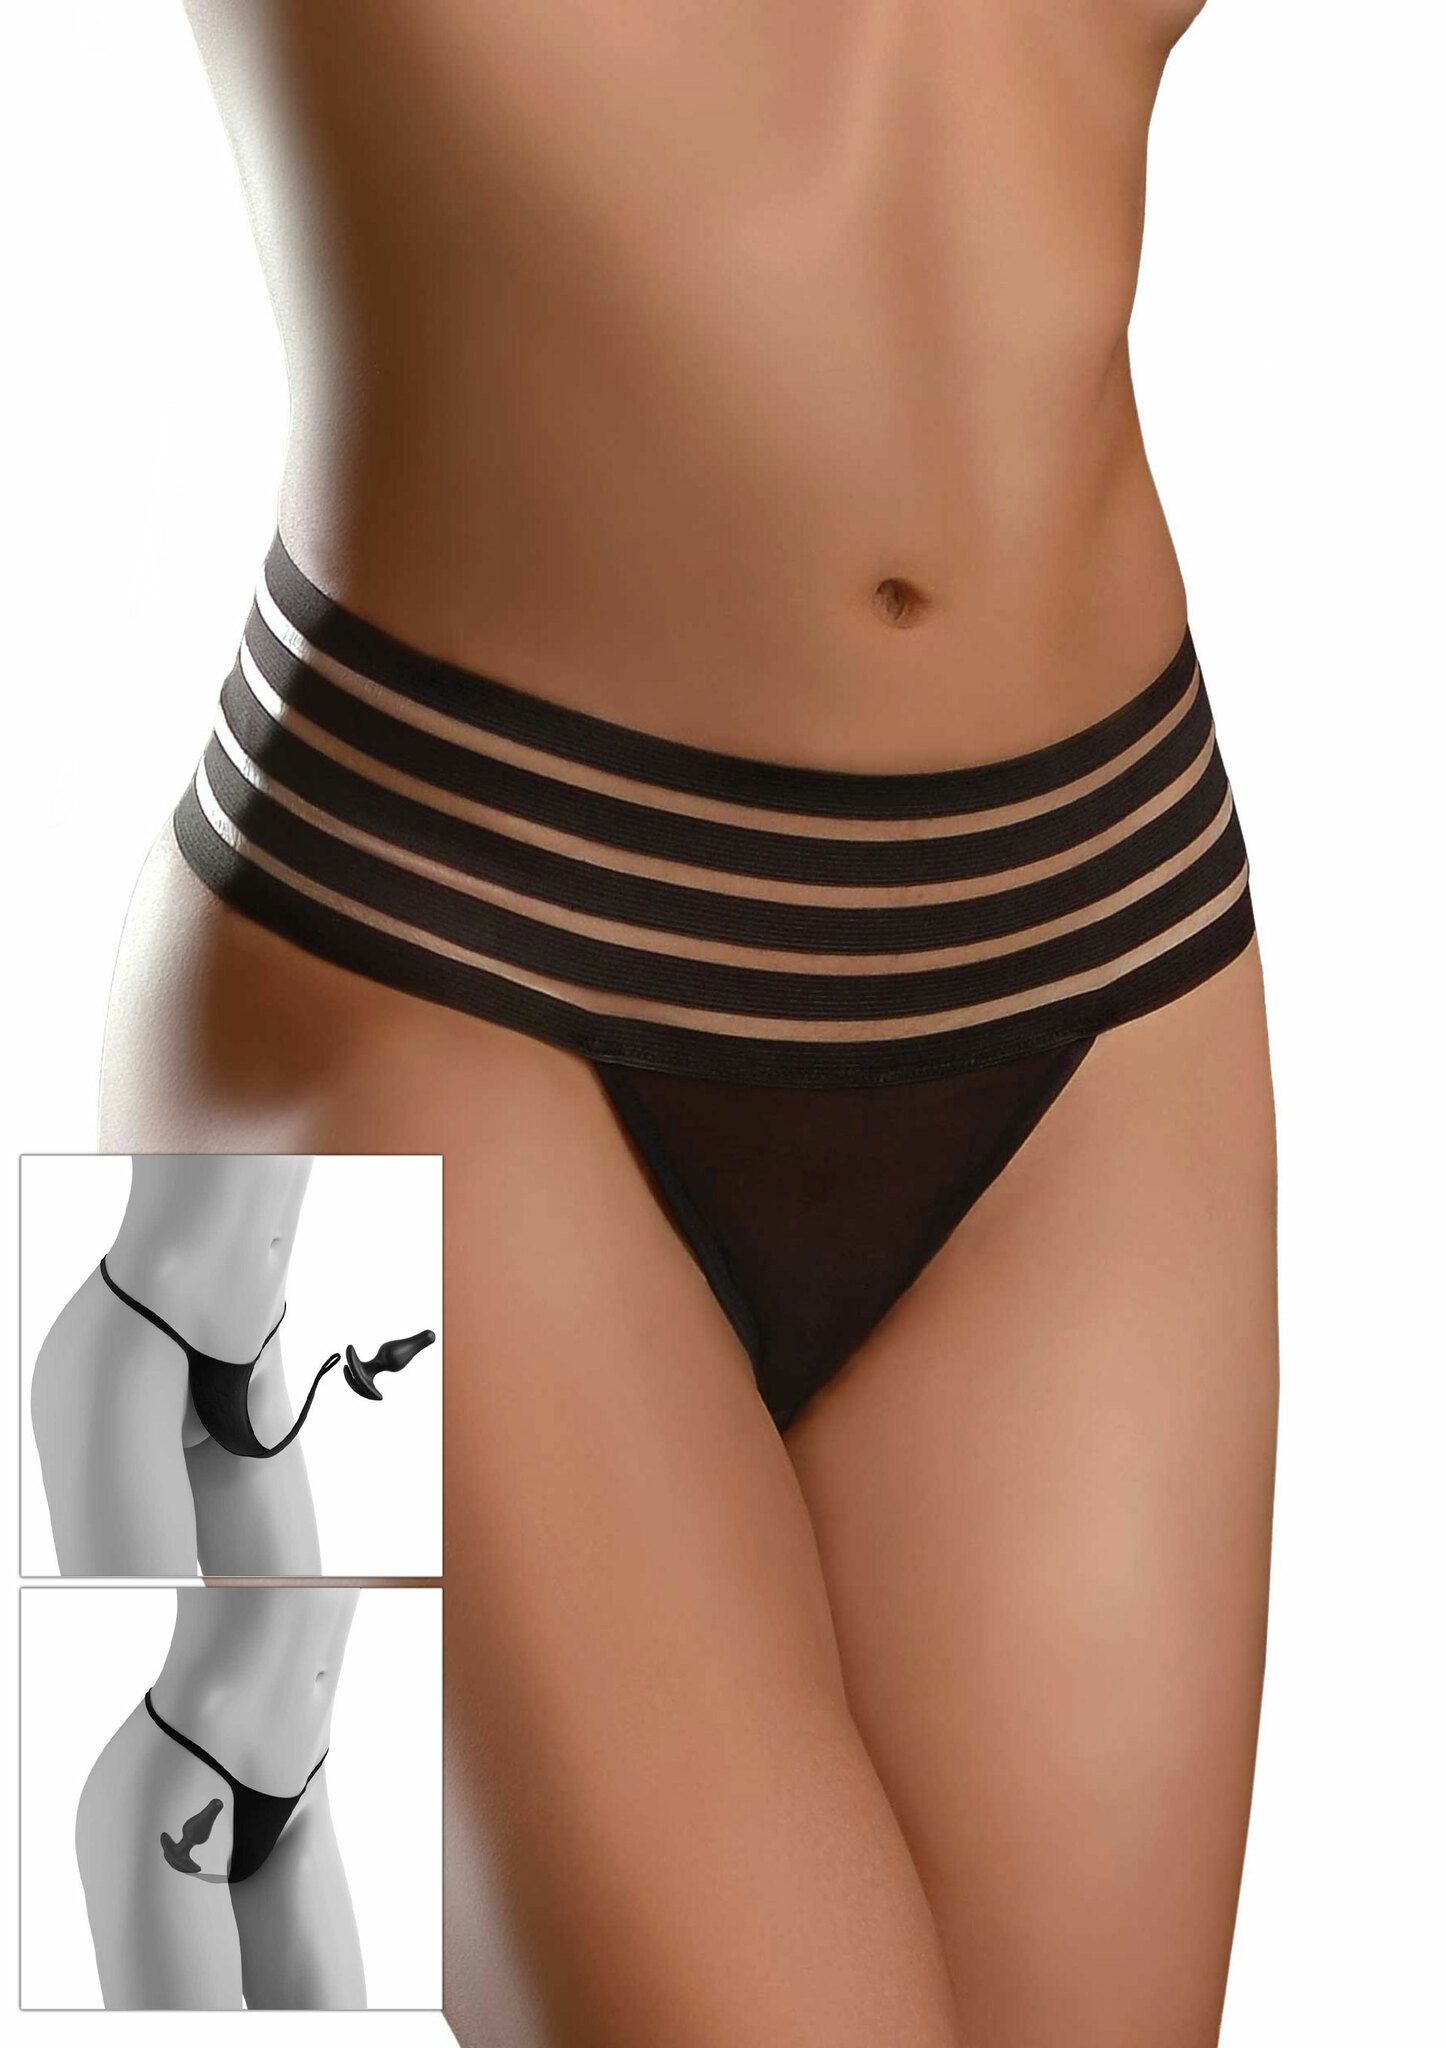 Hookup panties - Crotchless Love Garter, One size